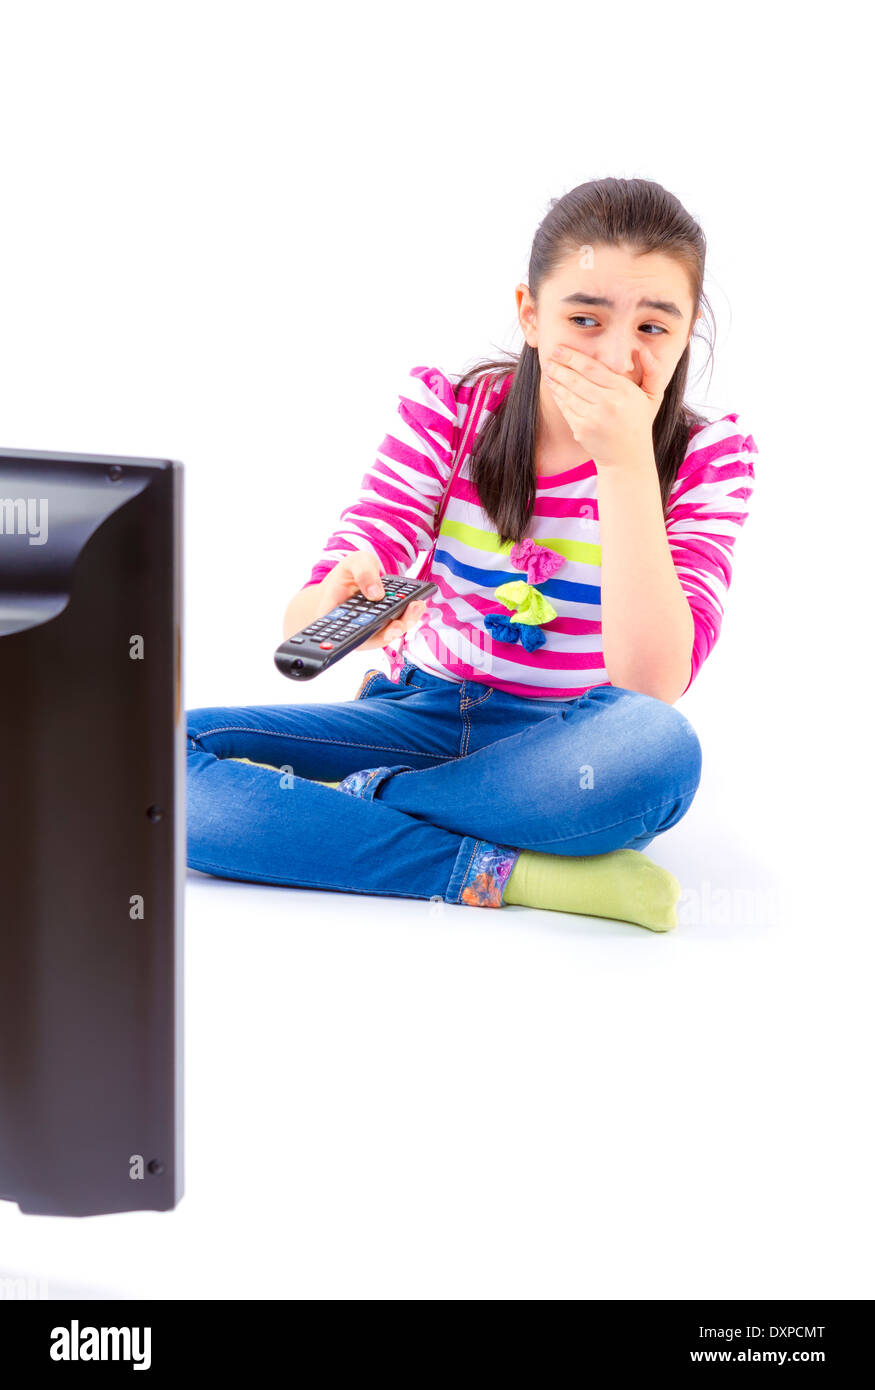 Scared little girl watching tv Stock Photo